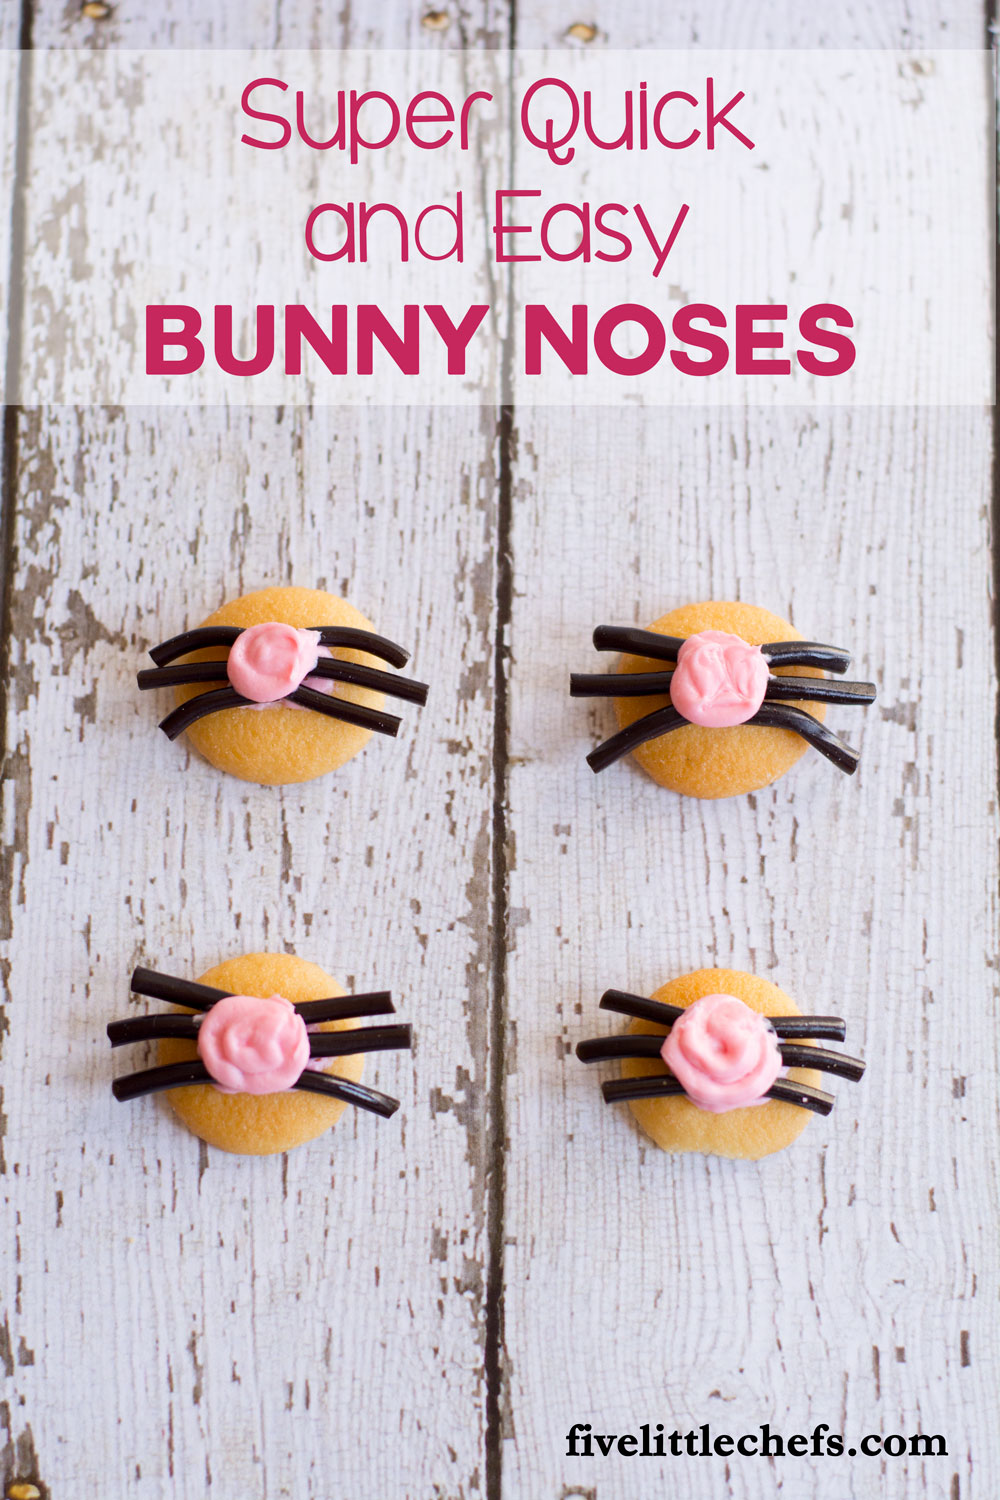 Quick and easy easter bunny noses after school snack.